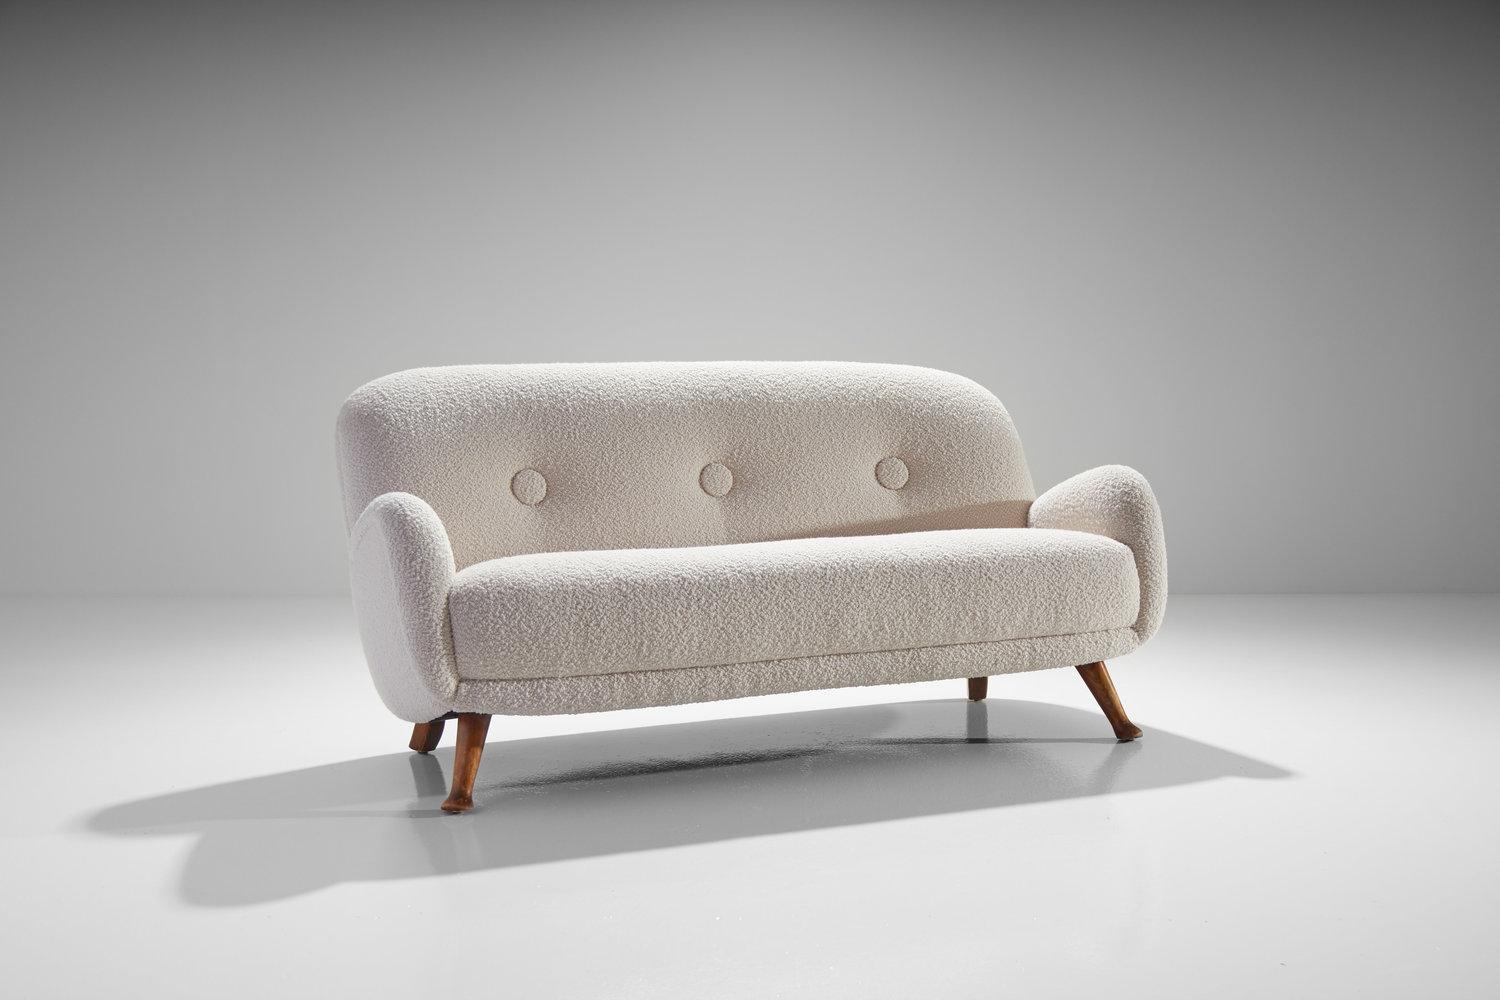 Sofa by Berga Möbler, Sweden from the 1940s.

This sofa by Berga Möbler with it’s soft organic forms is playful and sophisticated at the same time. The sofa is slightly tilted backward by the tapered front legs that are distinctly bend outwards.